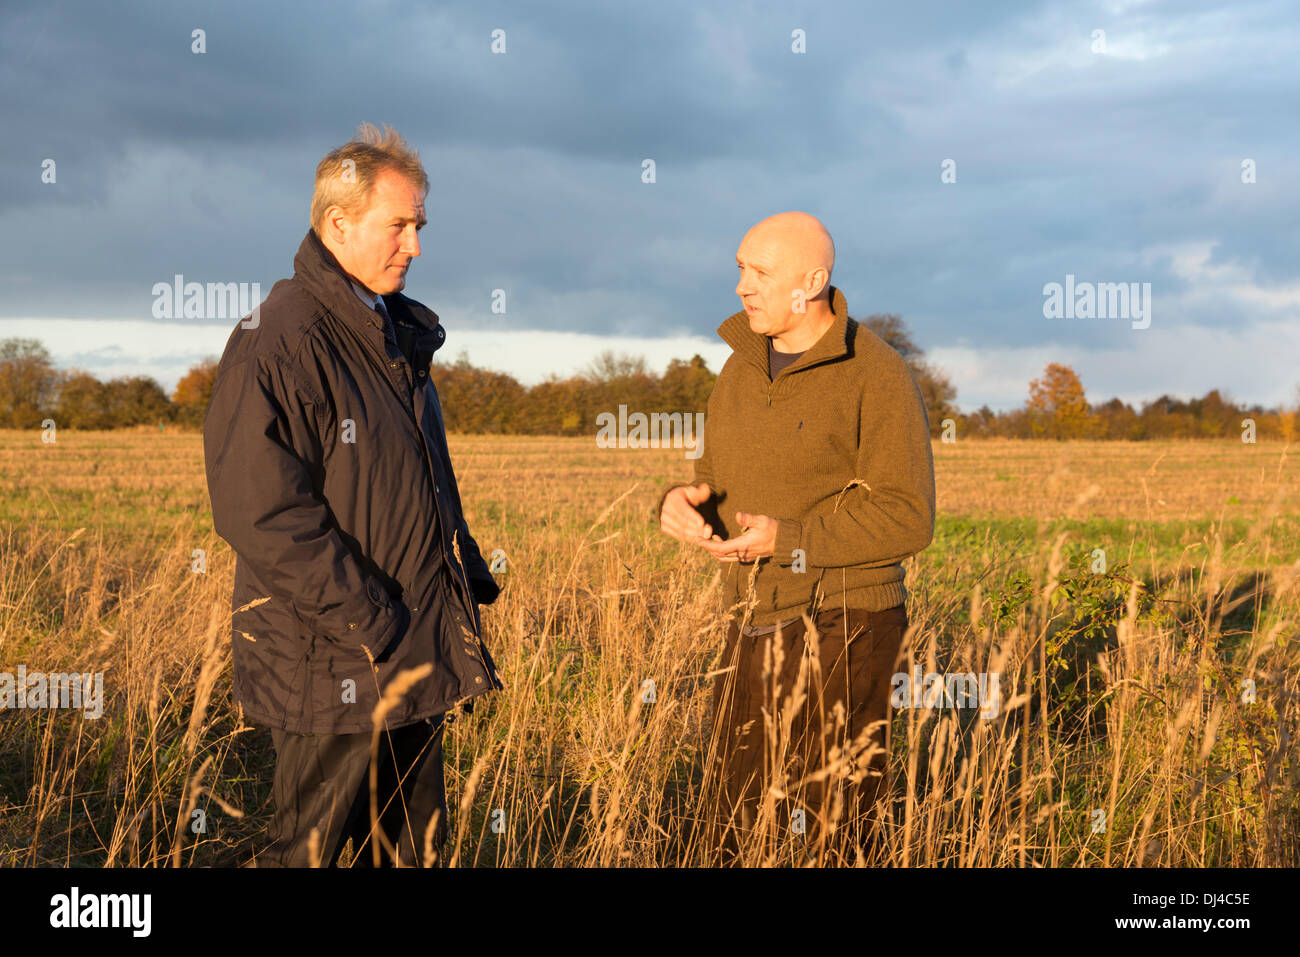 Lark Rise Farm,  Barton, Cambridge UK.  21st Nov, 2013.Owen Paterson MP,  Secretary of State for Environment, Food and Rural Affairs, visits Lark Rise Farm,  home of the Countryside Restoration Trust, Barton, Cambridge UK 21st November 2013. Farmer Tim Scott showed the Secretary of State around the farm before they met with Trust Founder and Chairman Robin Page. The Countryside Restoration Trust is a charity promoting wildlife-friendly farming and campaigning for a living, working countryside where commercial farming can co-exist with conservation. Credit Julian Eales/Alamy Live News Stock Photo